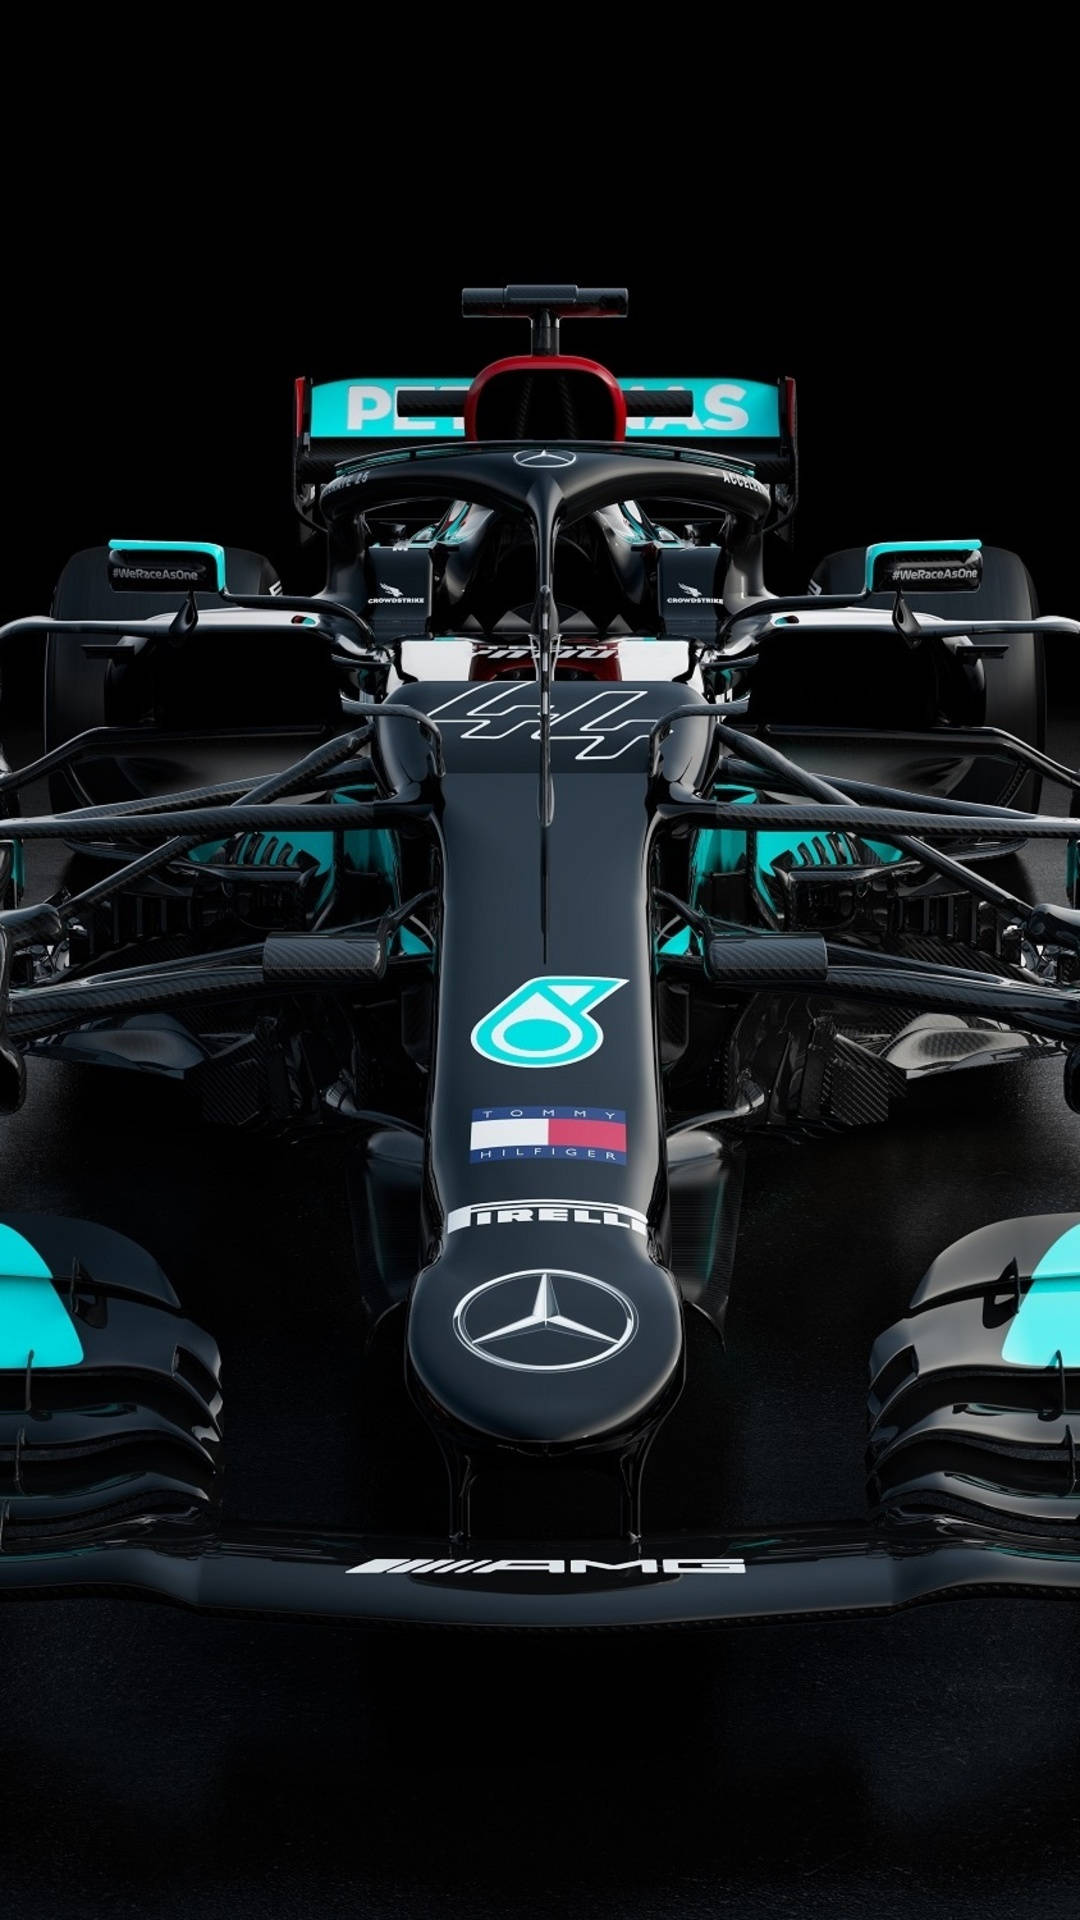 Get in the fast lane with the Mercedes F1 iPhone Wallpaper